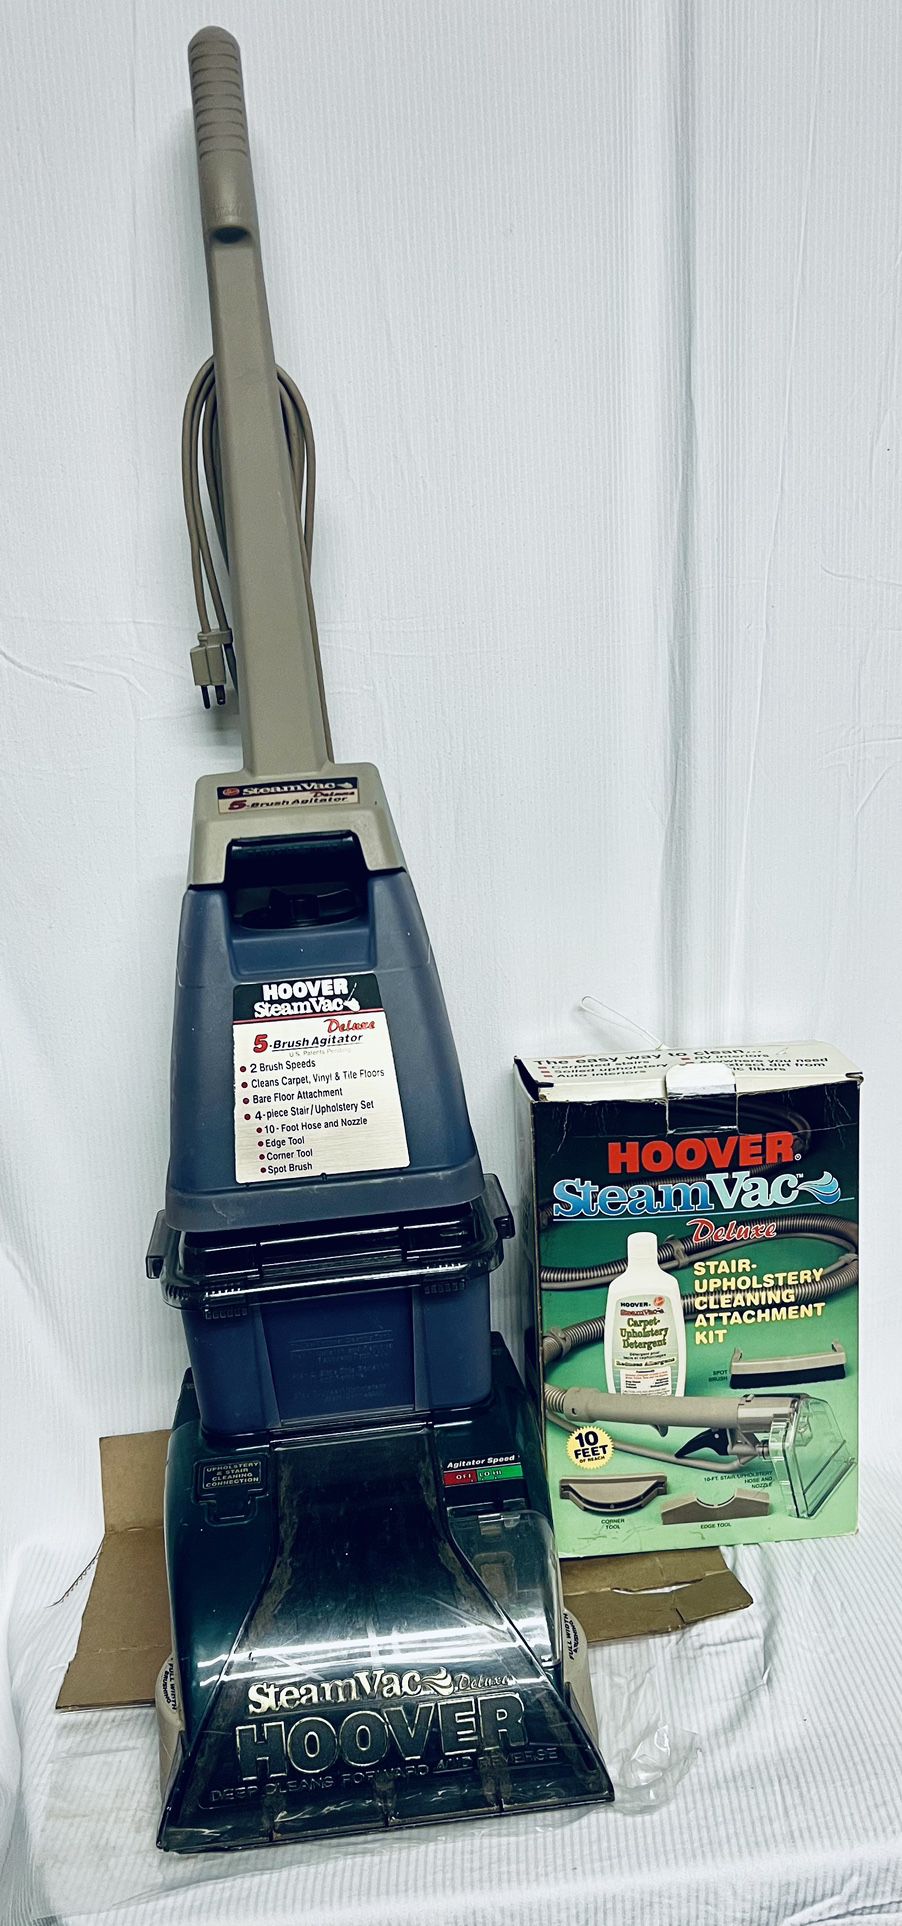 Hoover Vacuum Cleaner SteamVac Deluxe And Steamvac Accessories USED